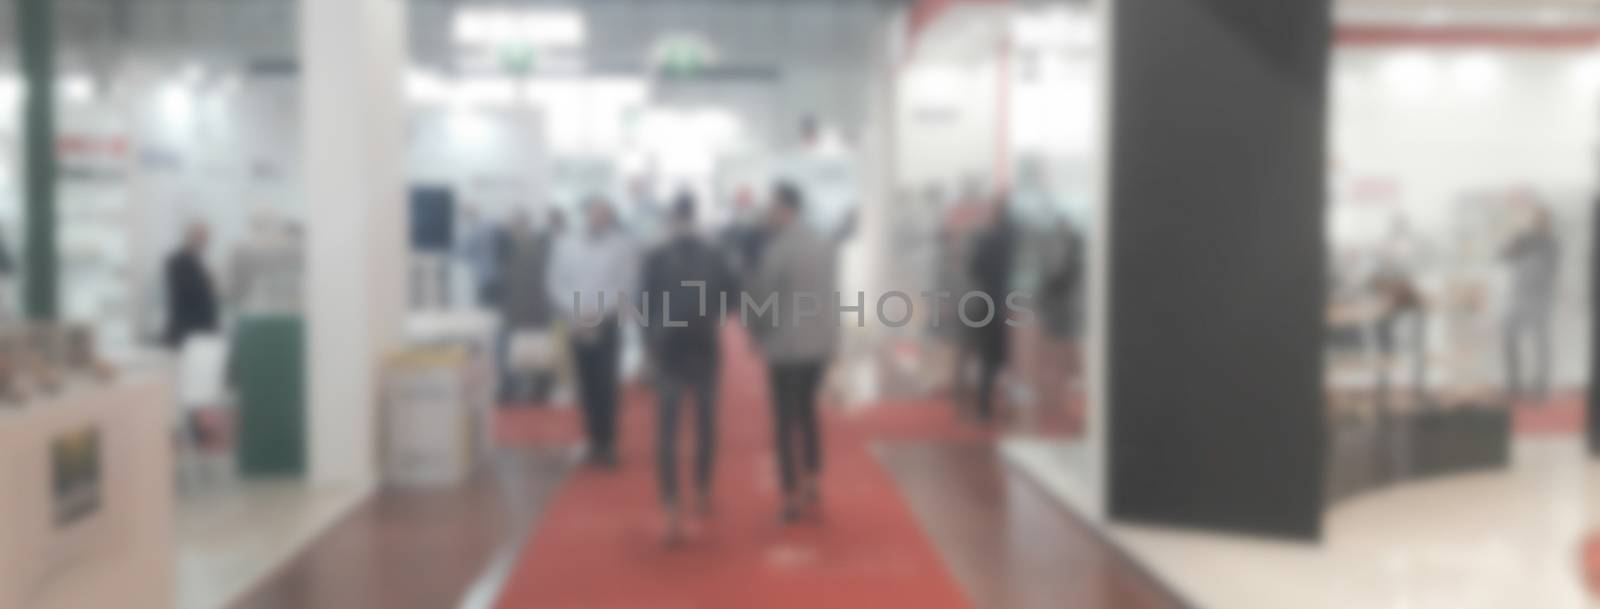 Defocused background of a trade show by marcorubino